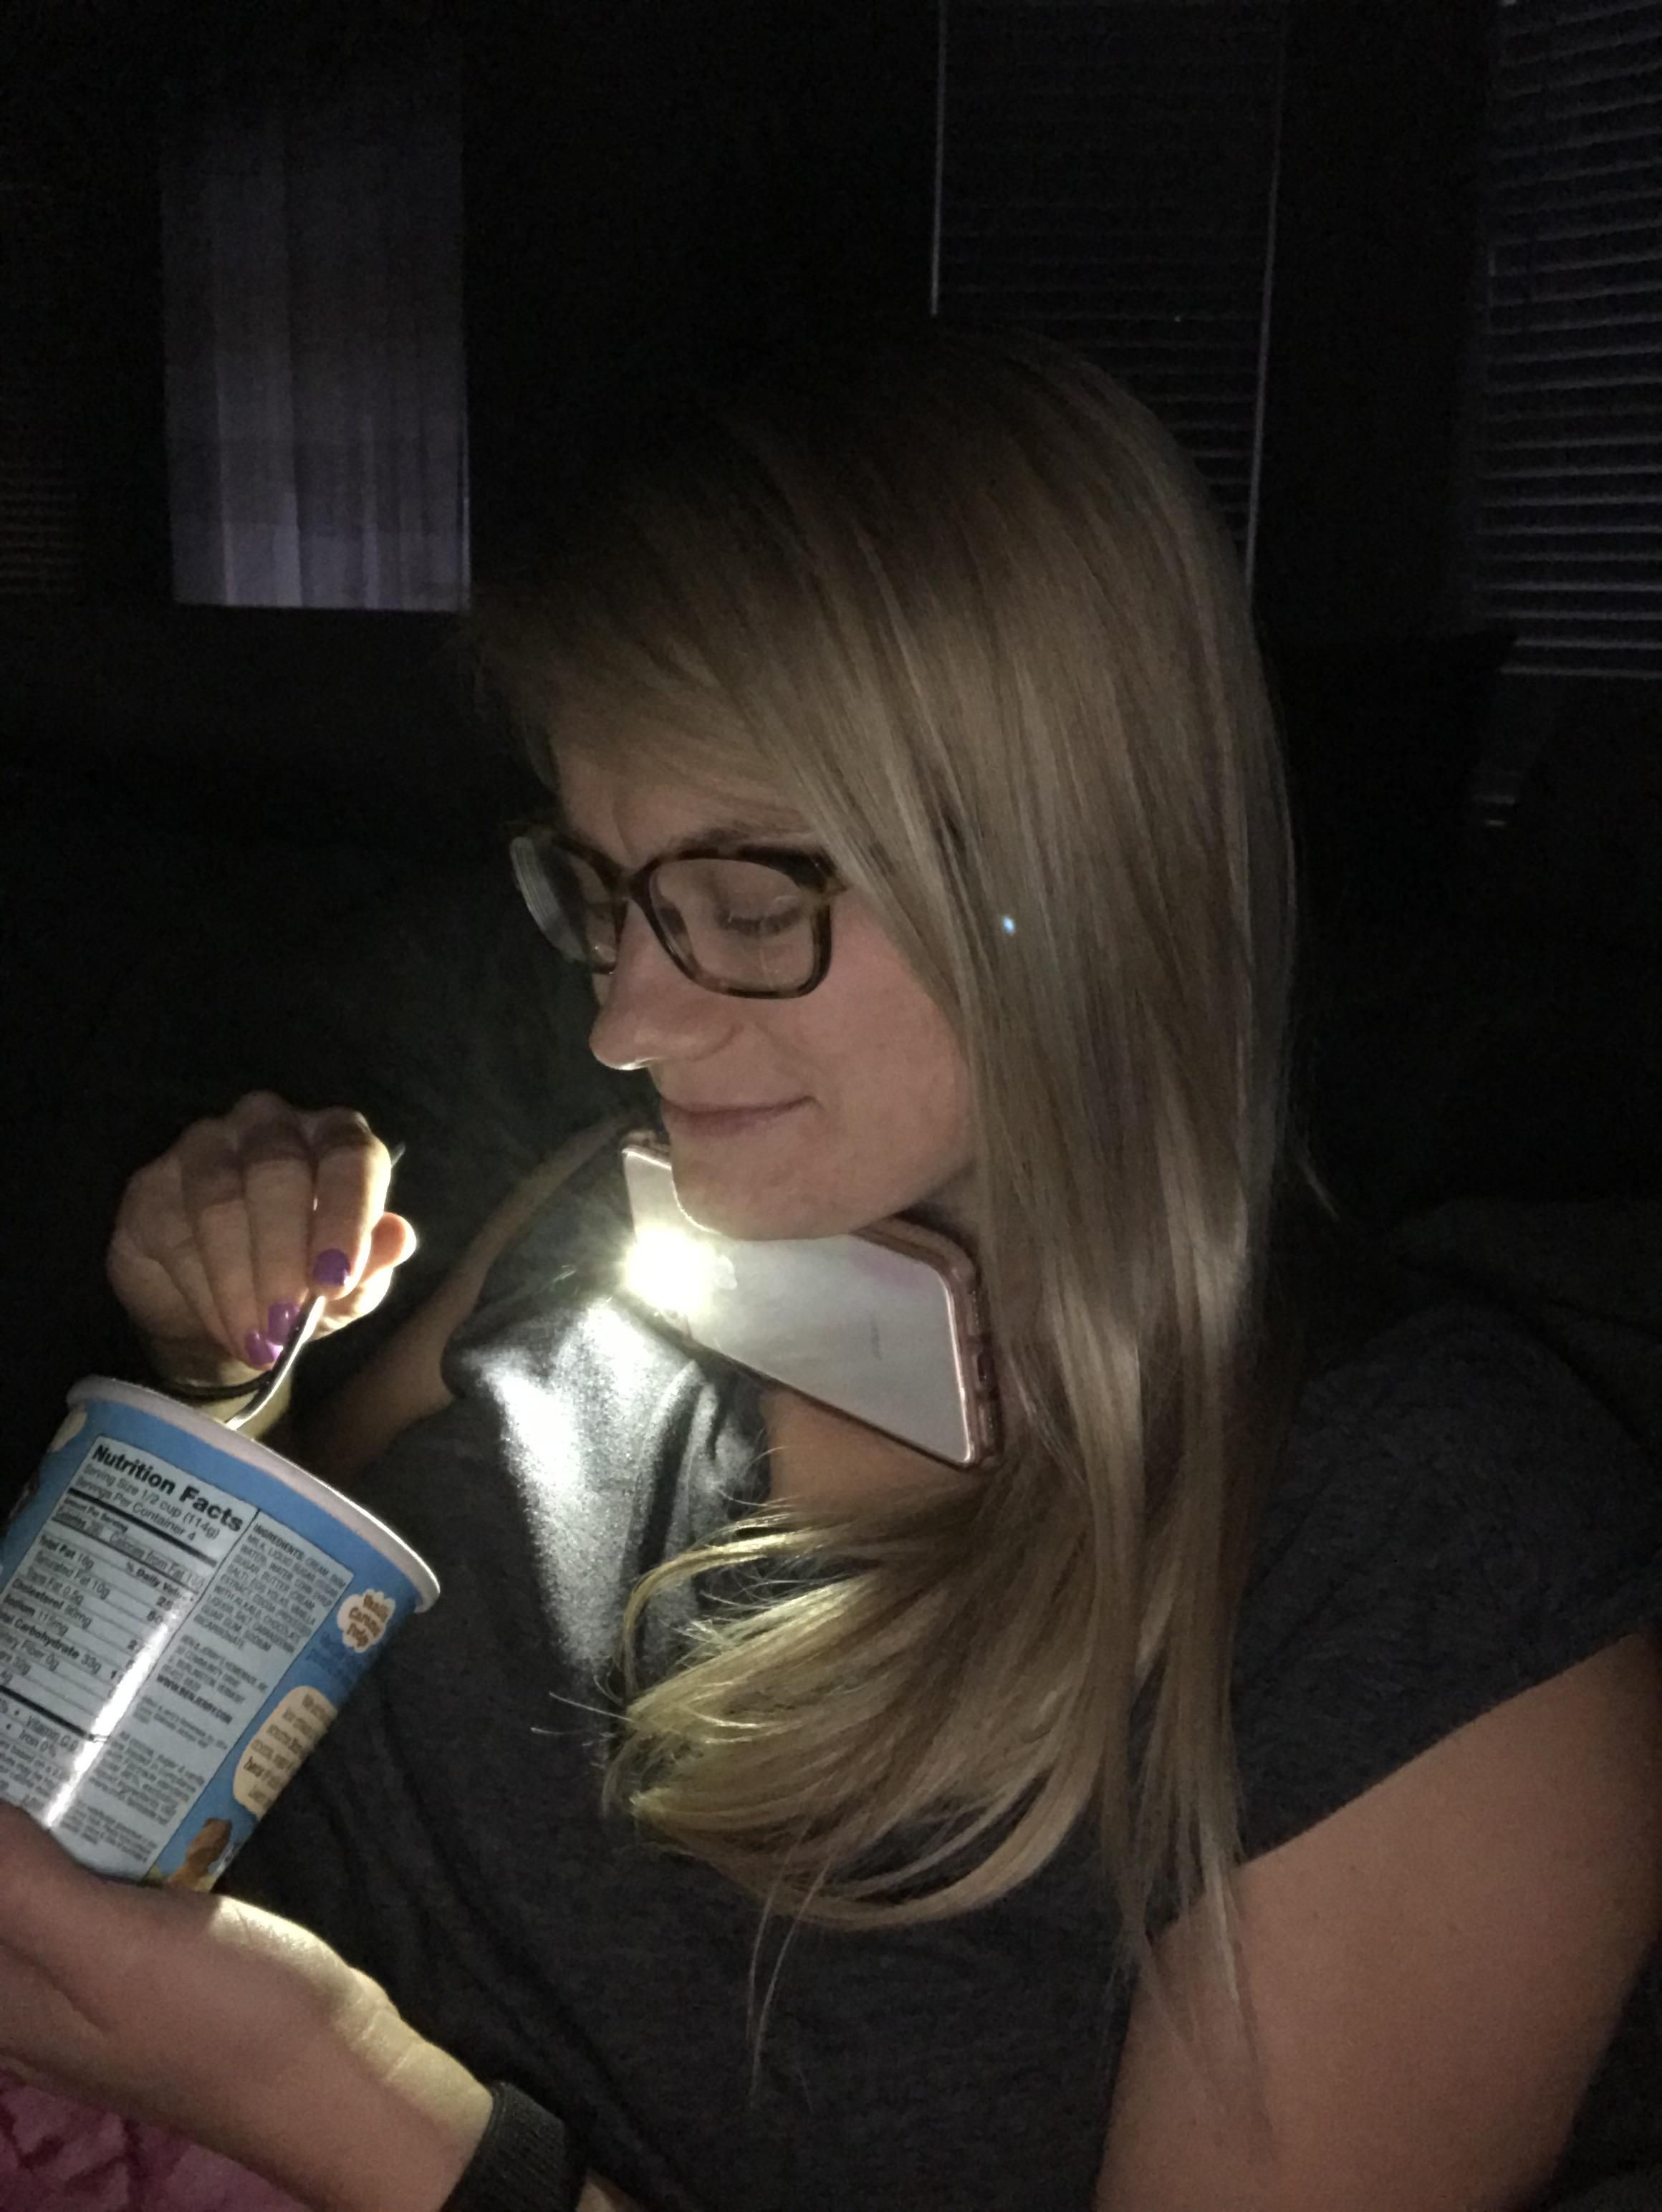 I look over and my wife is using her phone light to eat ice cream while we Netflix in the dark. Her reasoning is that she wanted to follow the fudge/caramel trails.